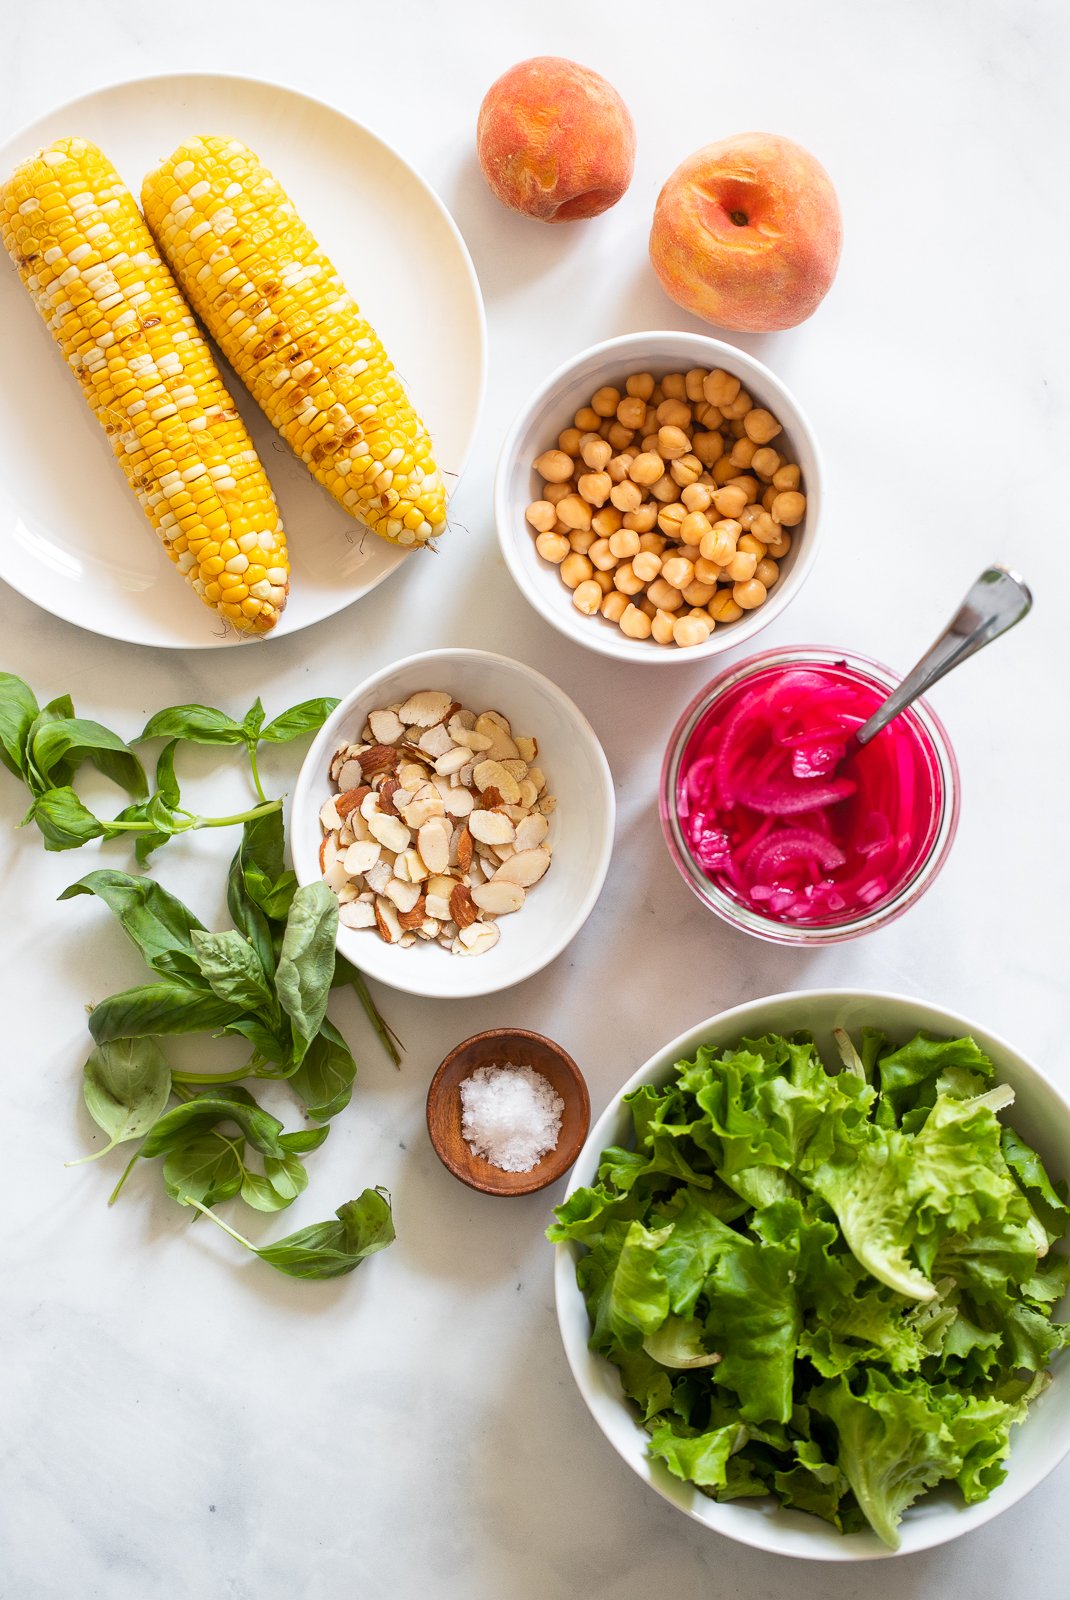 Summer Peach Salad with Grilled Corn and Toasted Almonds